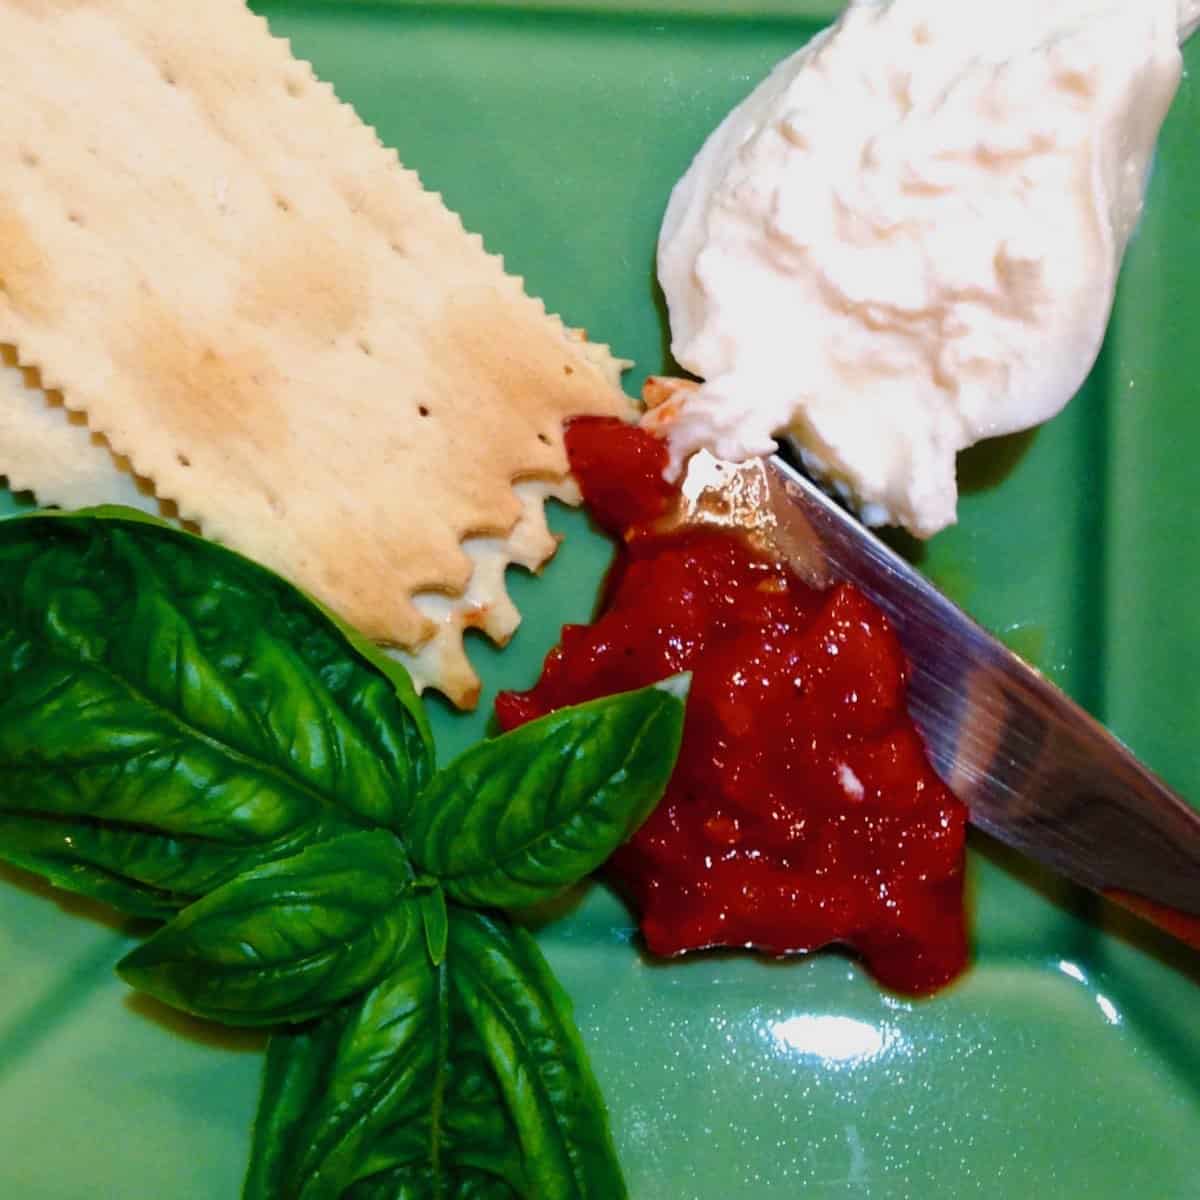 A new caprese plate of mozzarella, crackers and jam and basil.